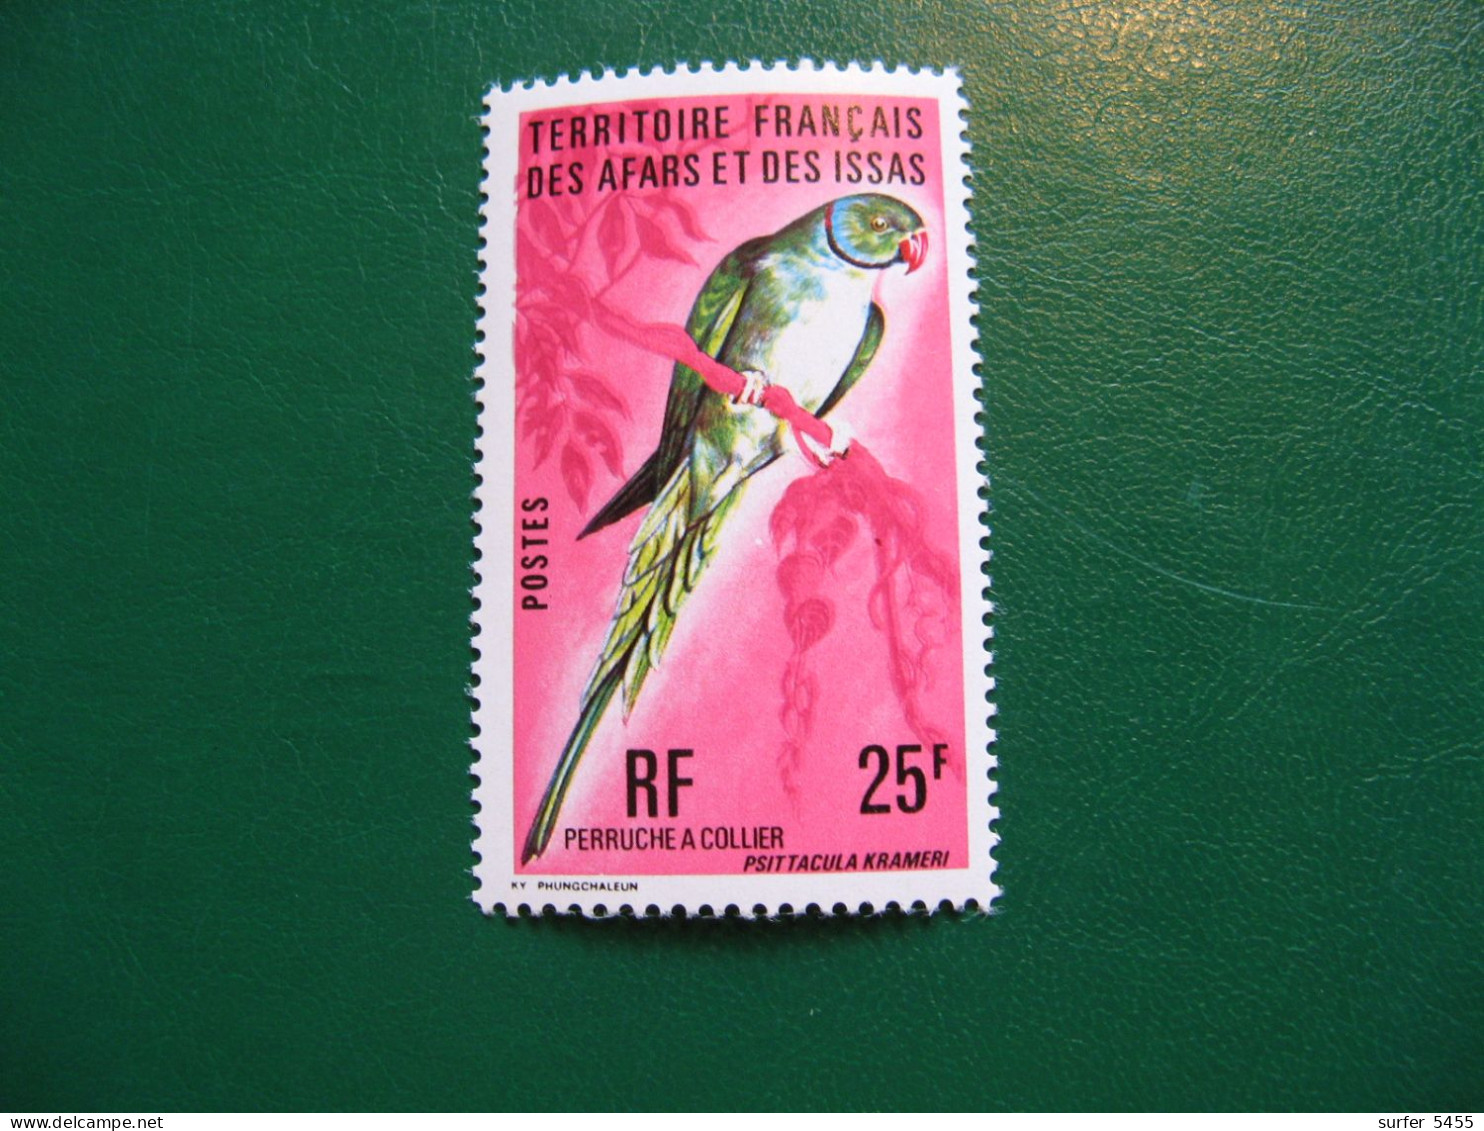 AFARS ET ISSAS - POSTE ORDINAIRE N° 428 - TIMBRE NEUF** LUXE - DEPAREILLE - MNH -  COTE 4,00 EUROS - Unused Stamps